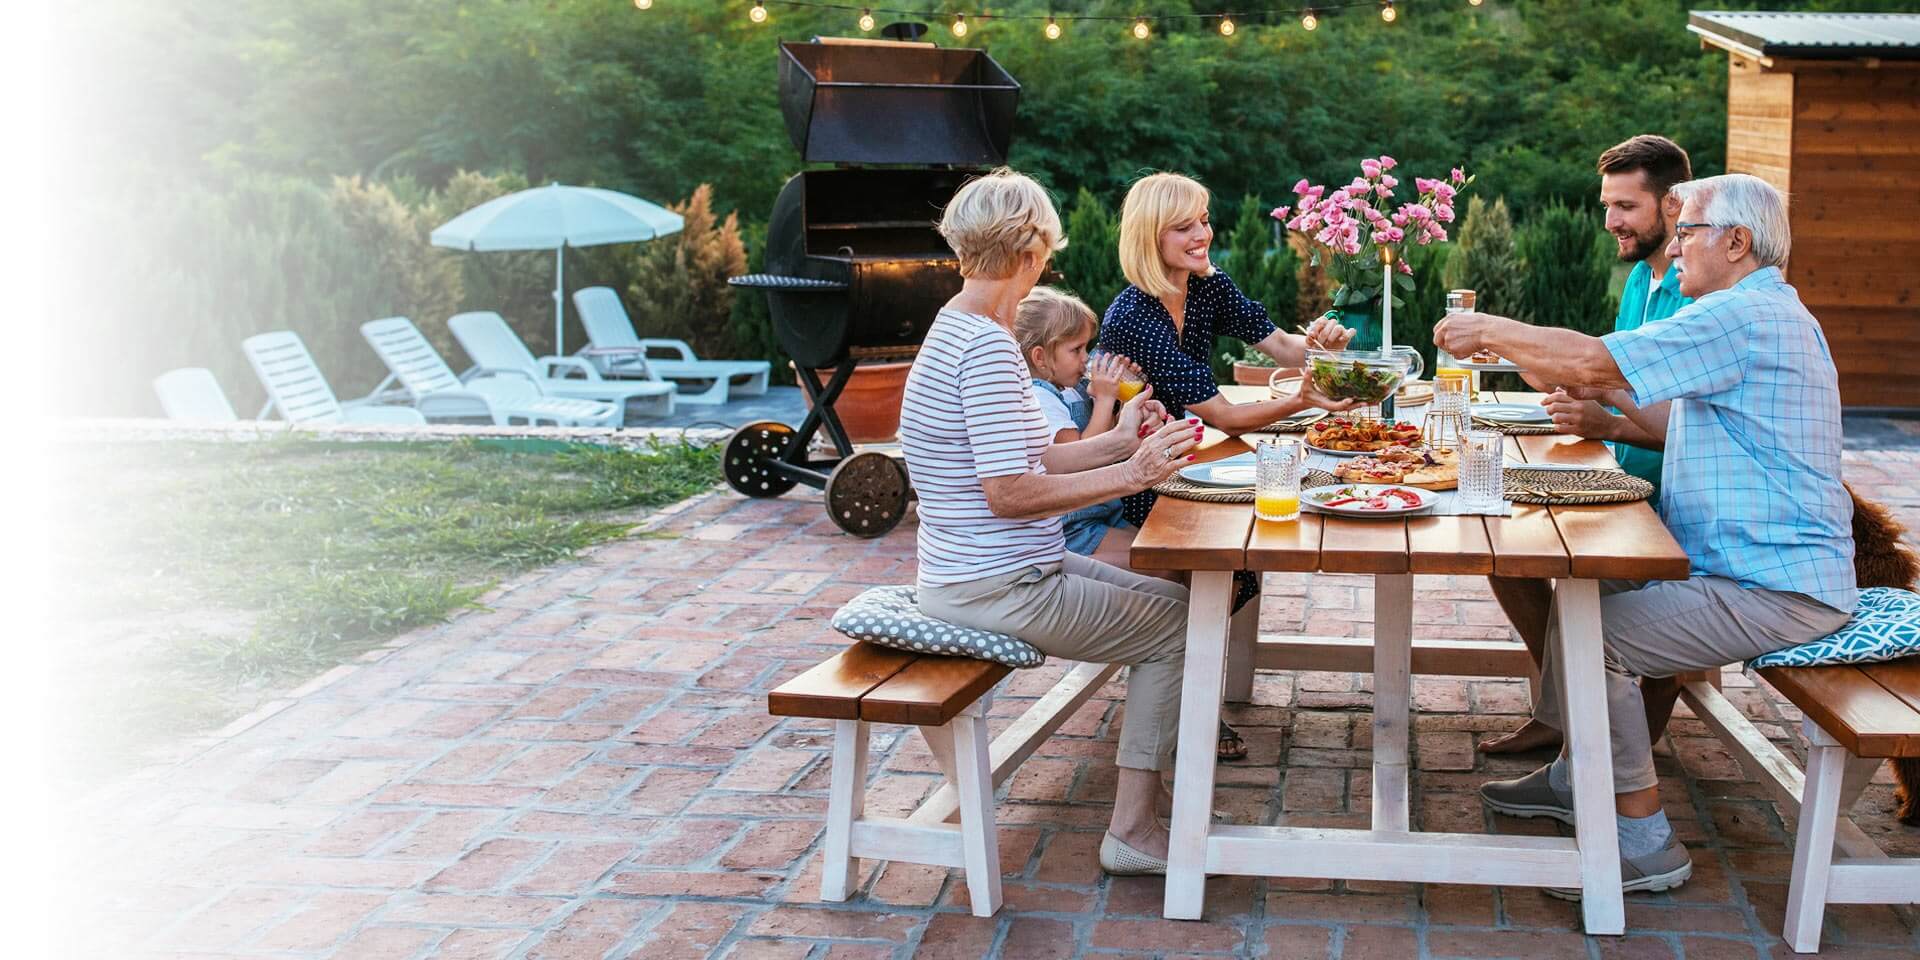 A family out on their patio having dinner